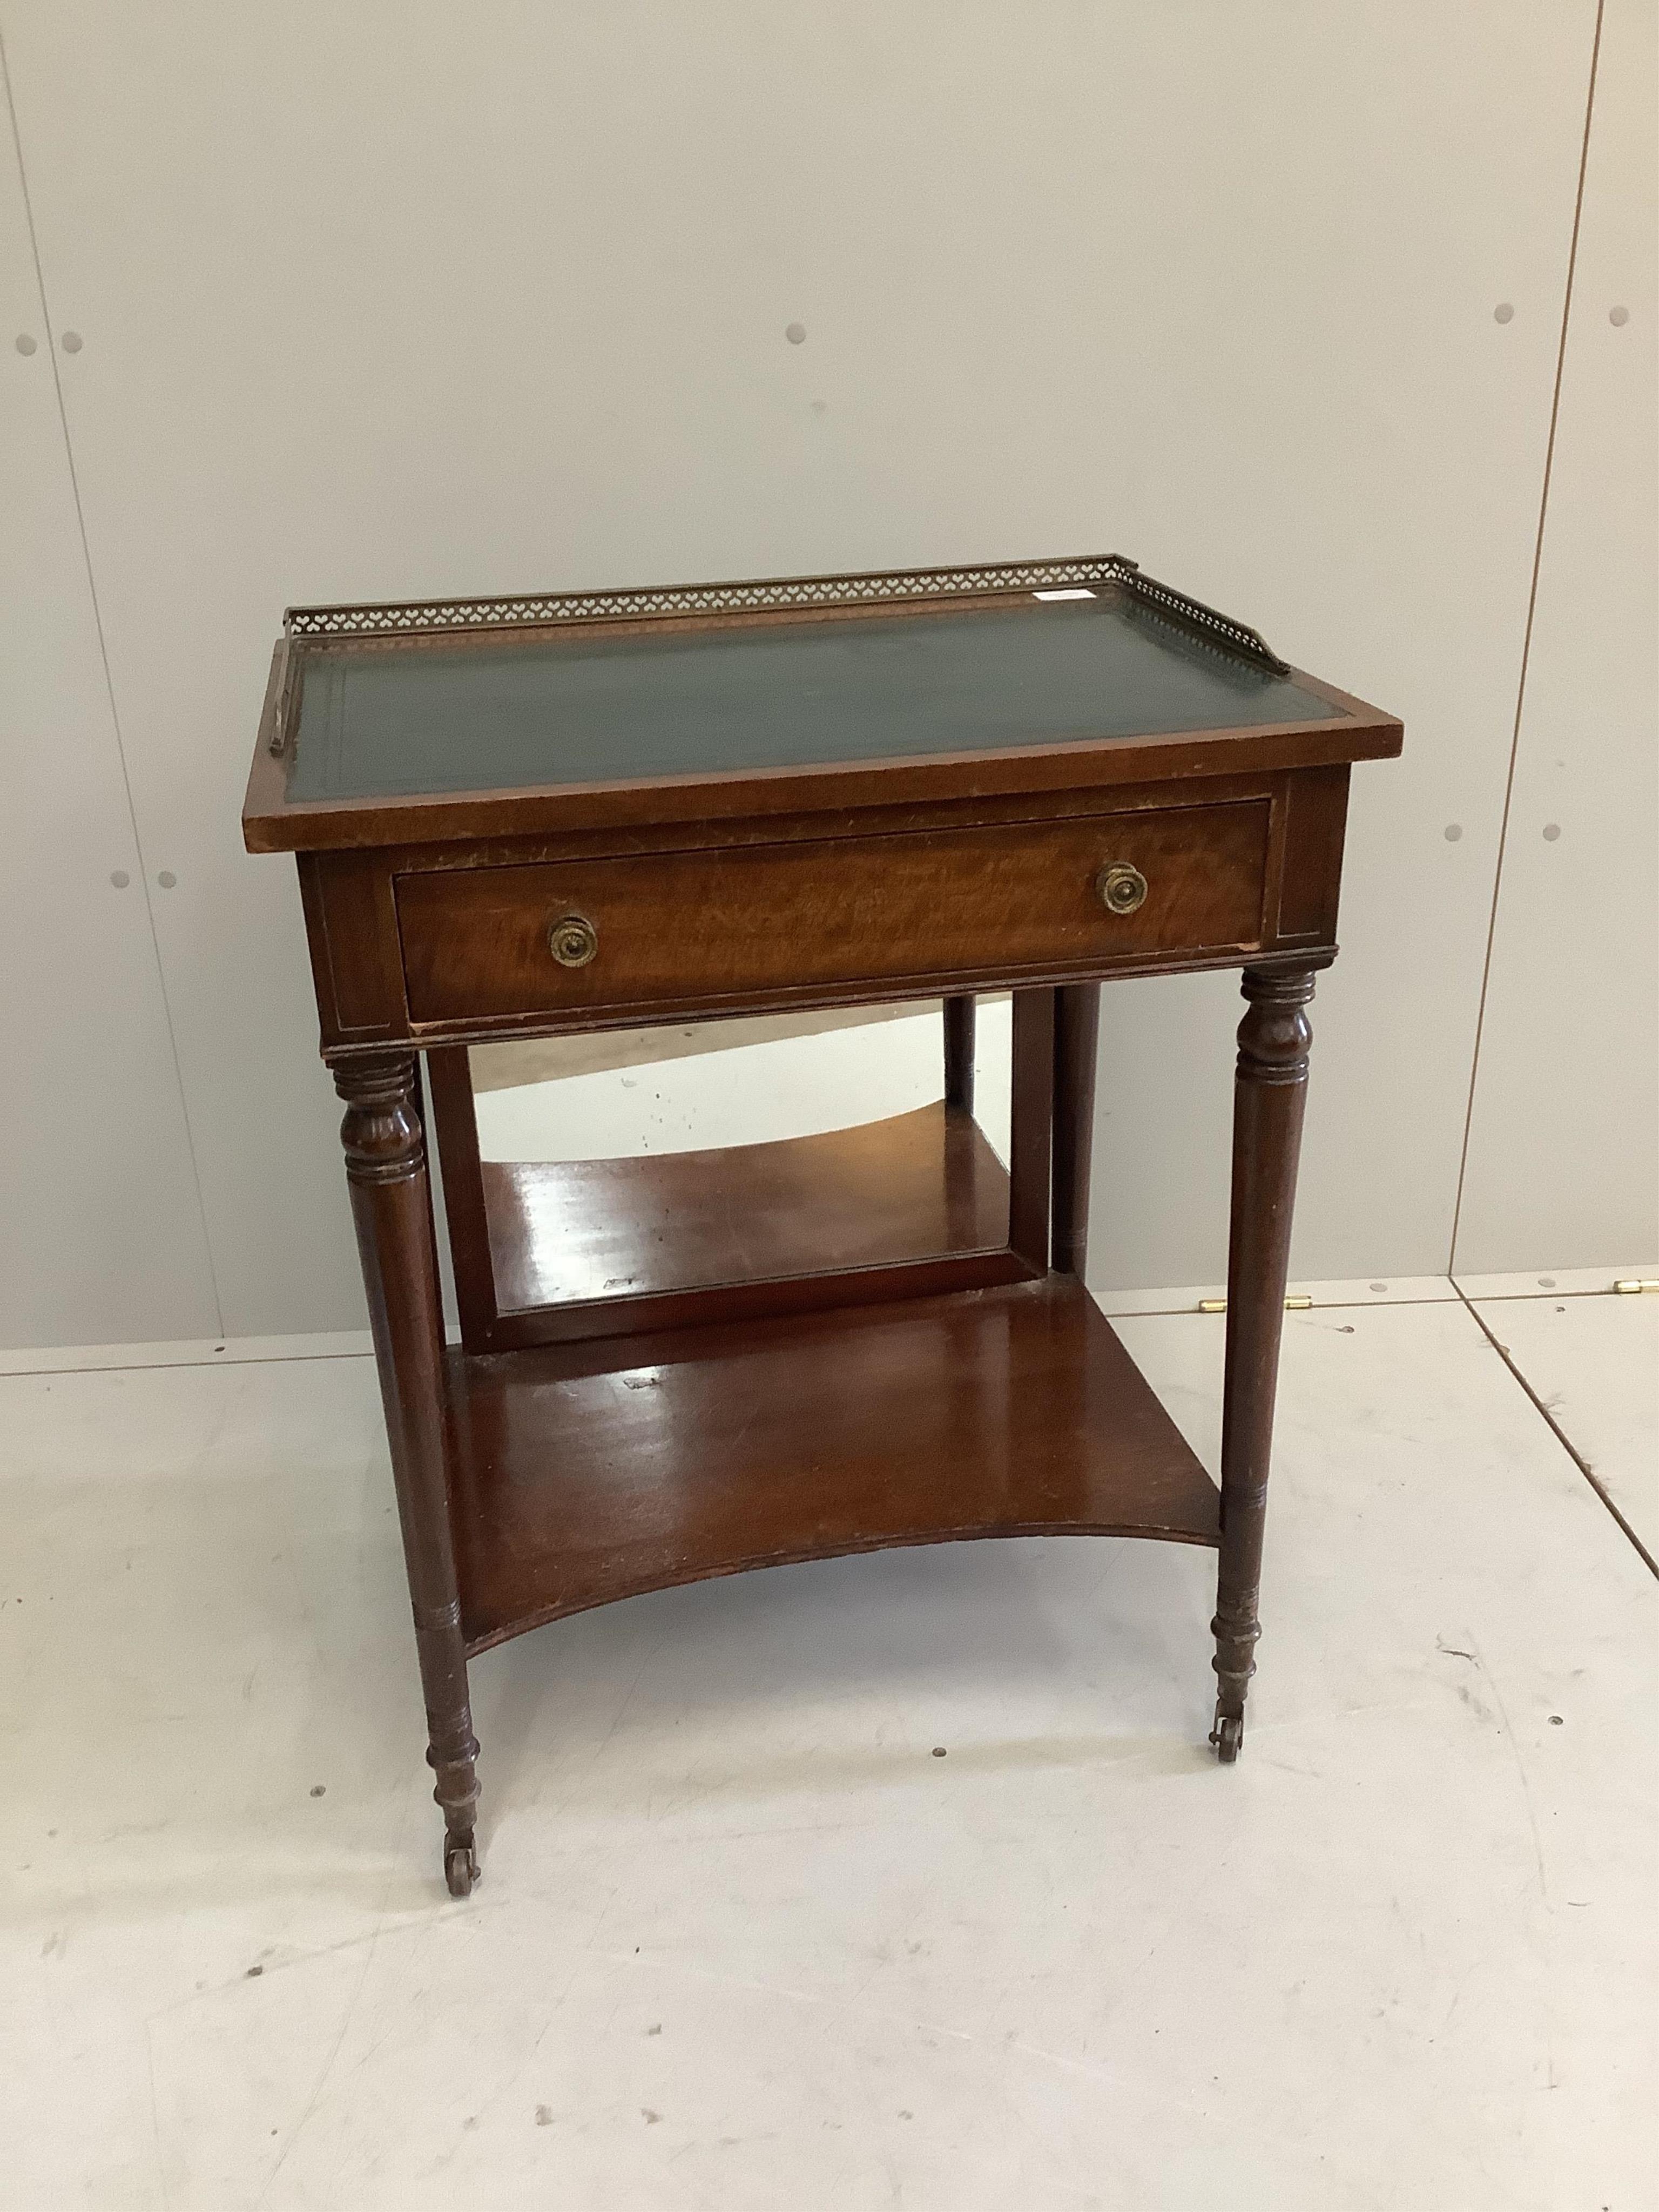 A Regency style mahogany writing / dressing table with rising mirror, width 62cm, depth 45cm, height 75cm. Condition - fair